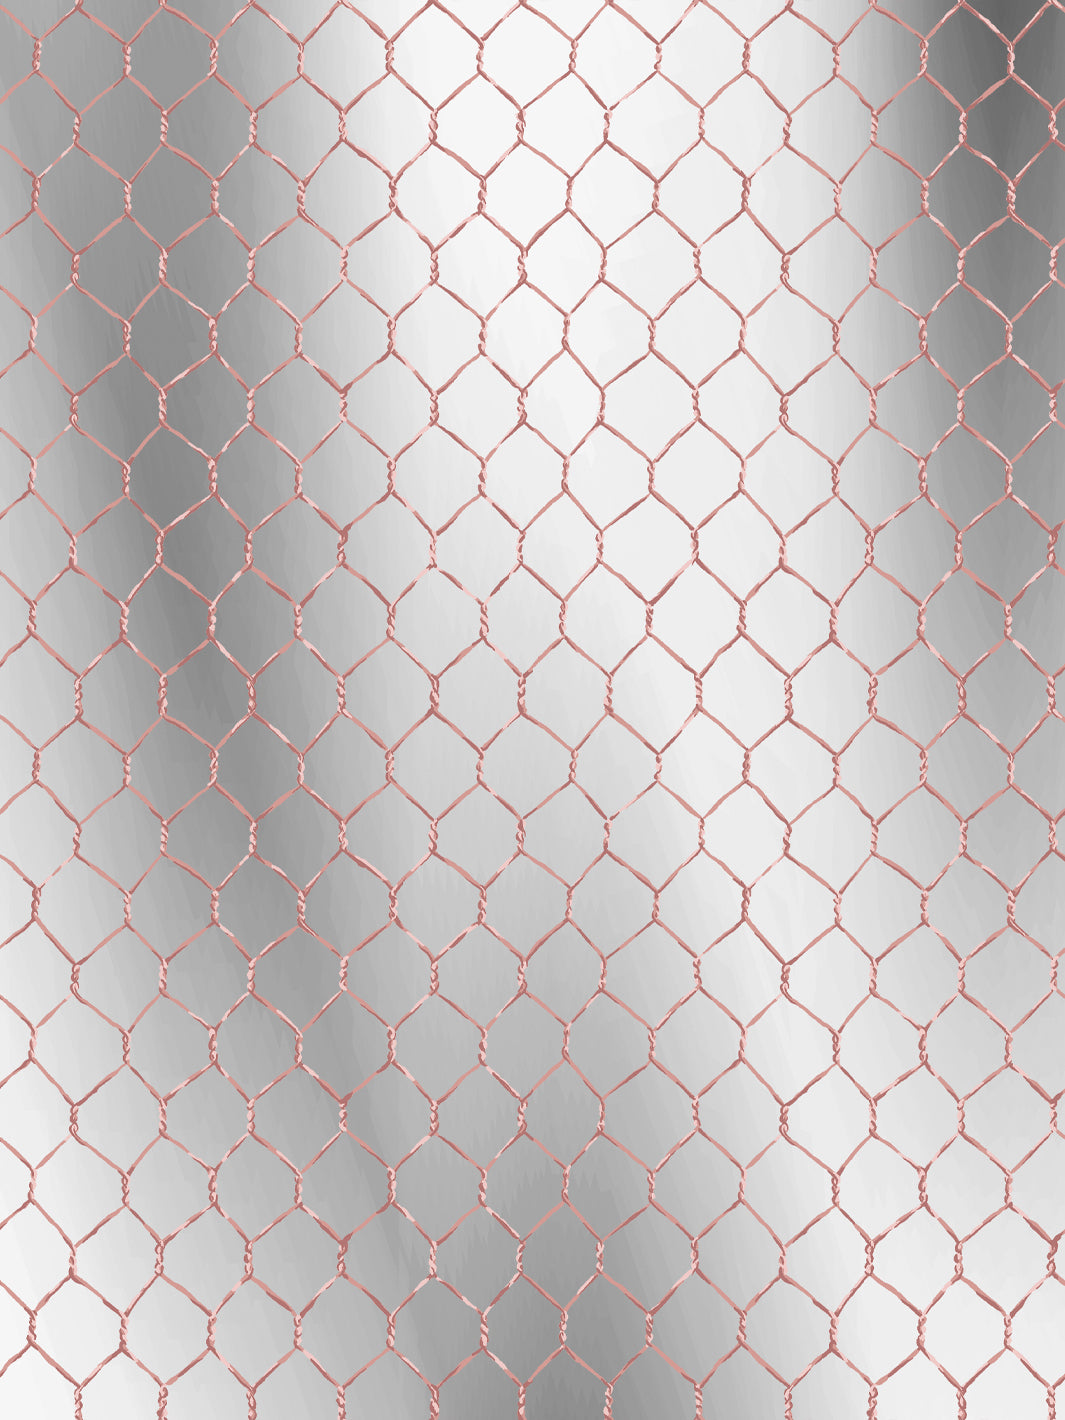 'Evelyn's Chicken Wire' Shiny Silver' Wallpaper by Sarah Jessica Parker - Bleecker Blush on Mirror